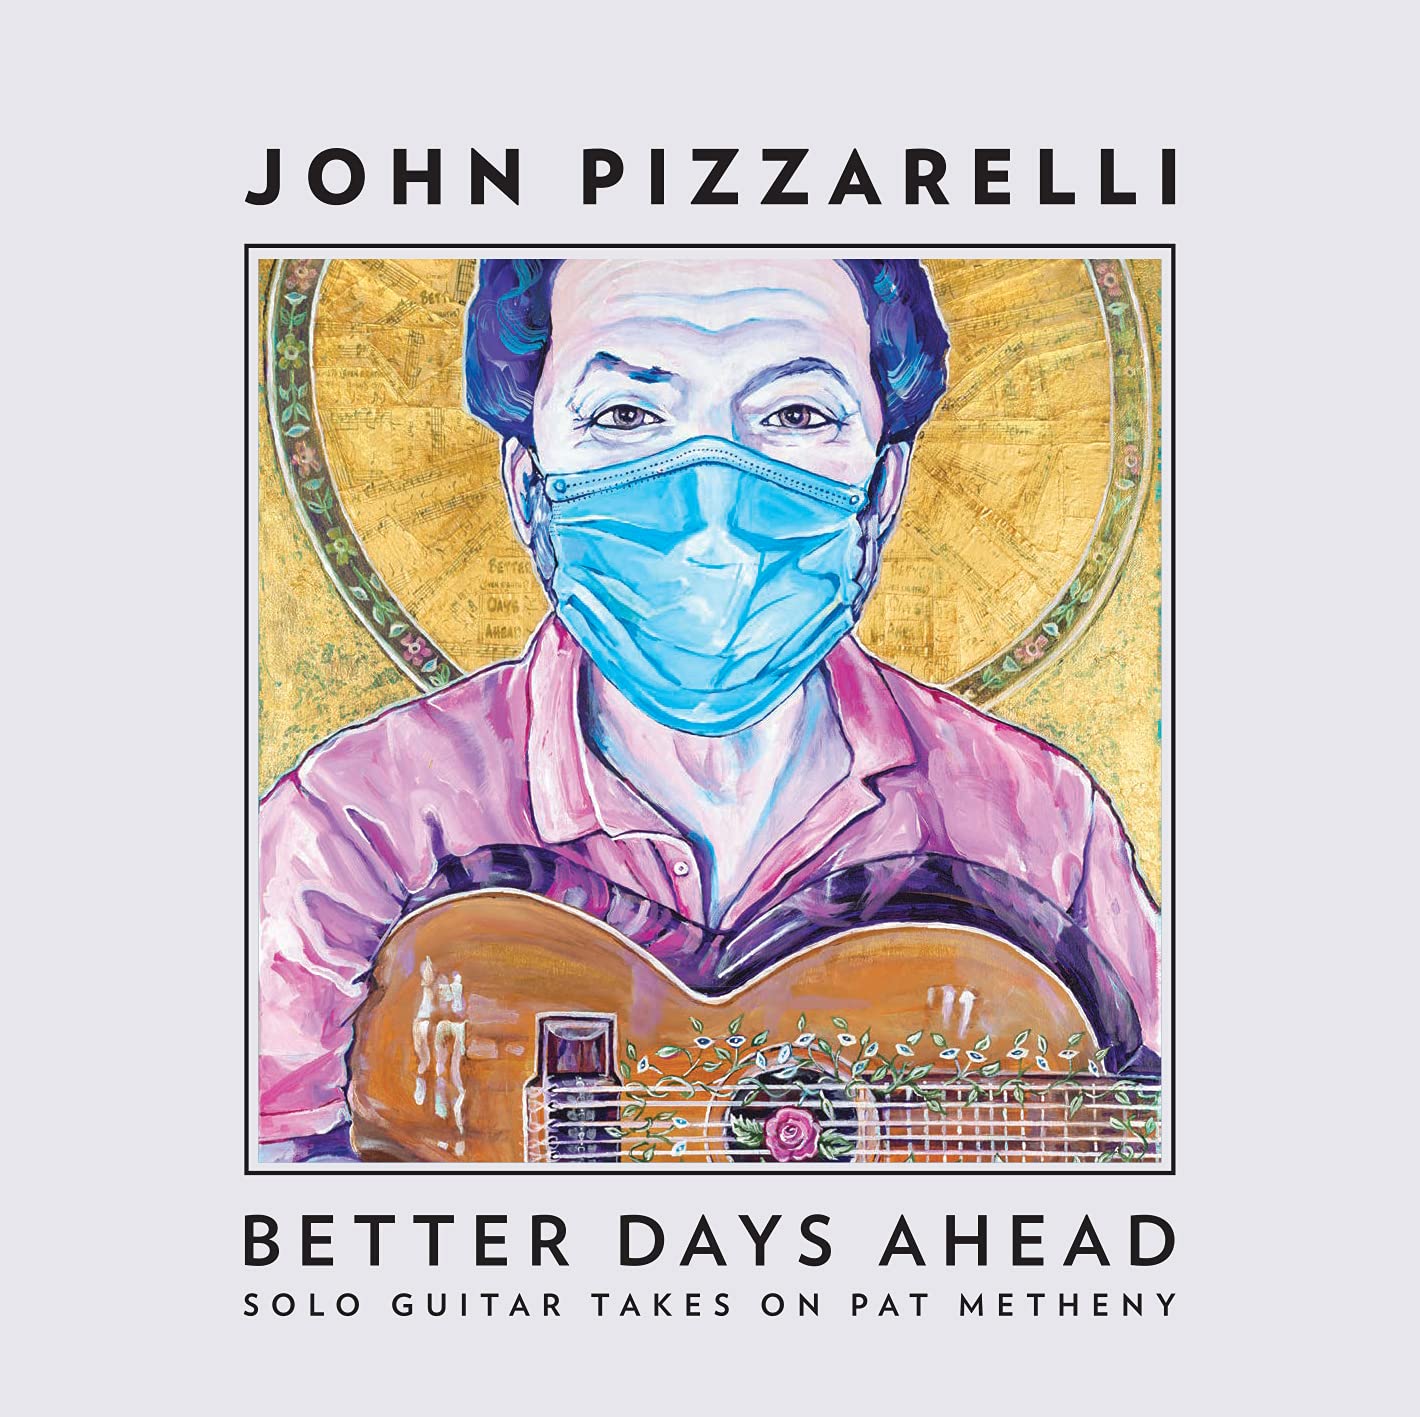 John Pizzarelli - Better Days Ahead: Solo Guitar Takes on Pat Metheny (2021) [FLAC] Download